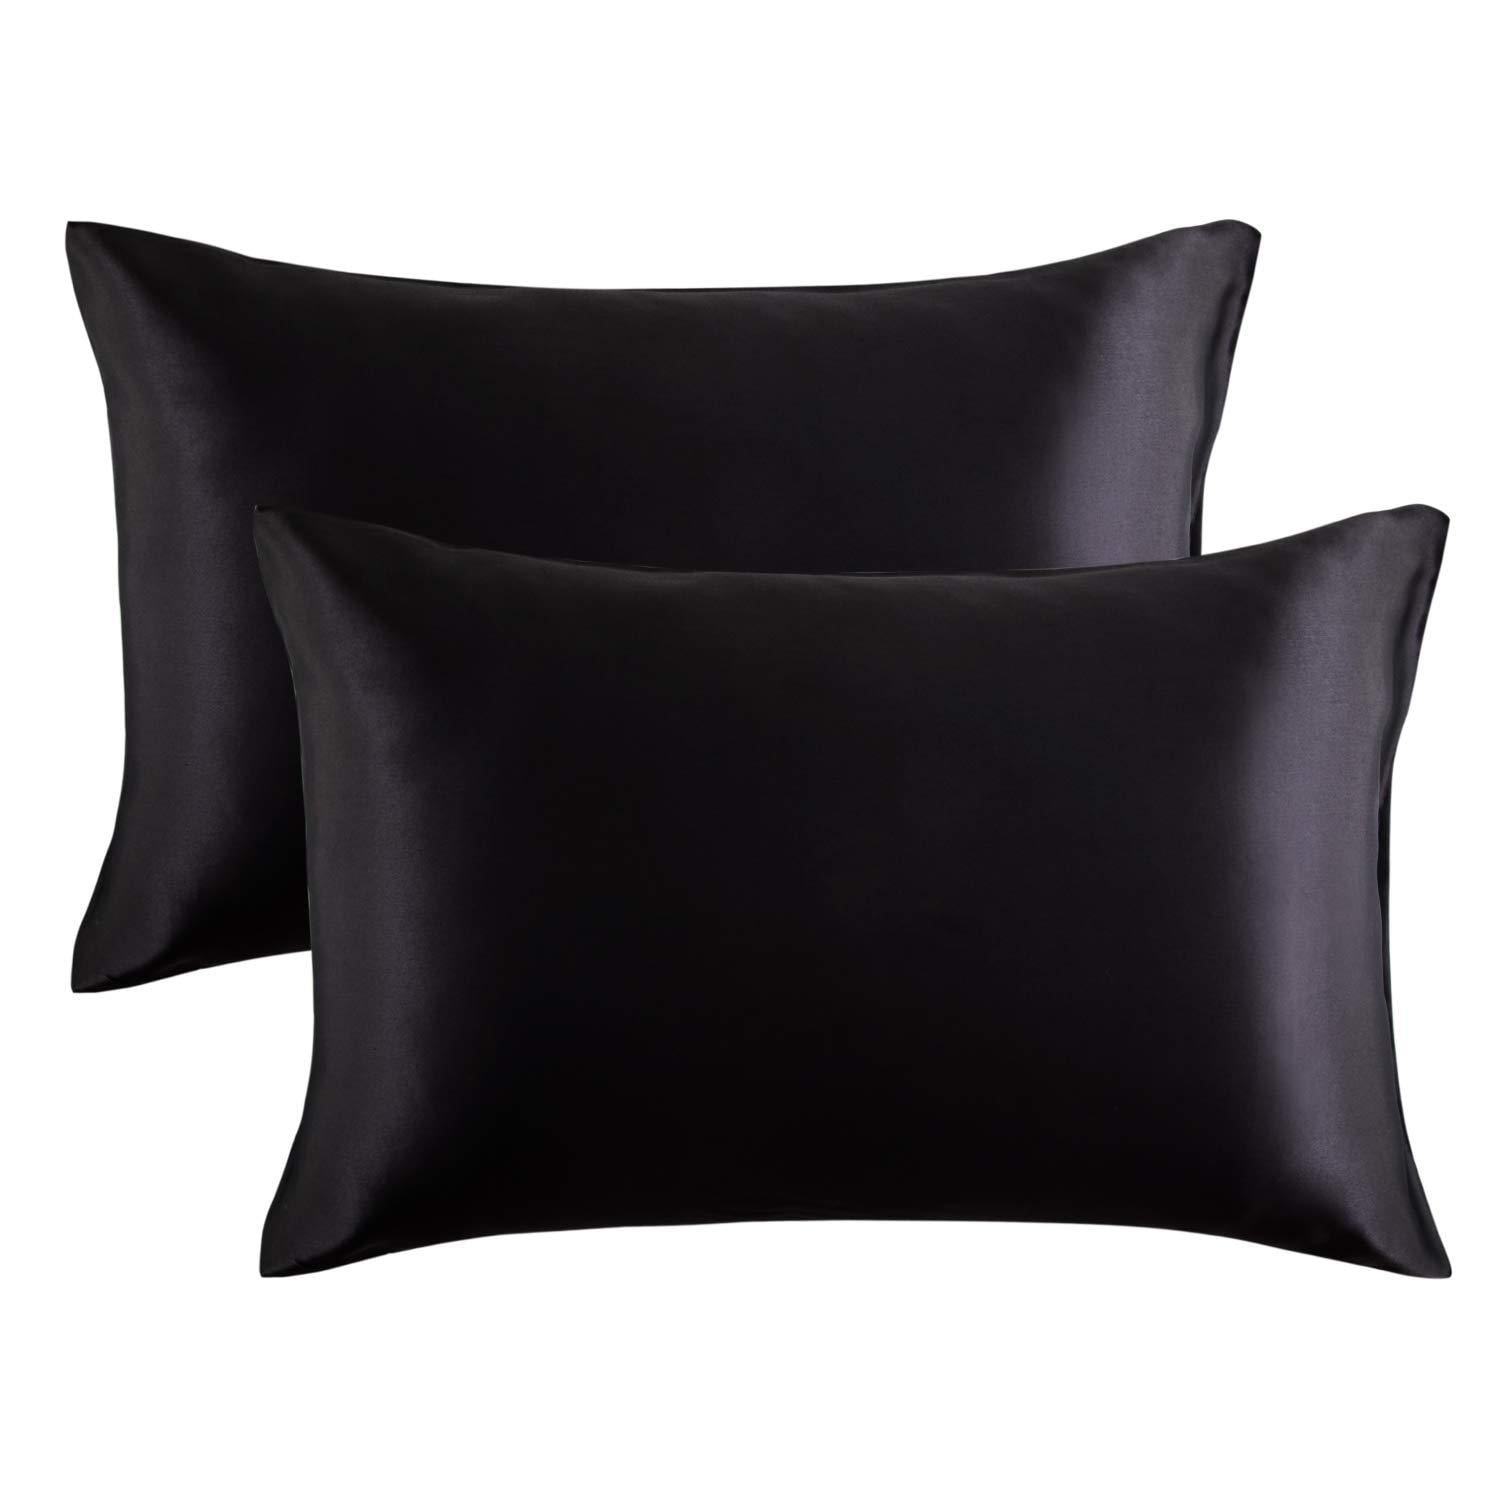 Zenssia Satin Pillowcase for Hair and Skin 20x36 inches Black King Size Pillow Cases Satin Pillow Covers with Envelope Closure 2-Pack